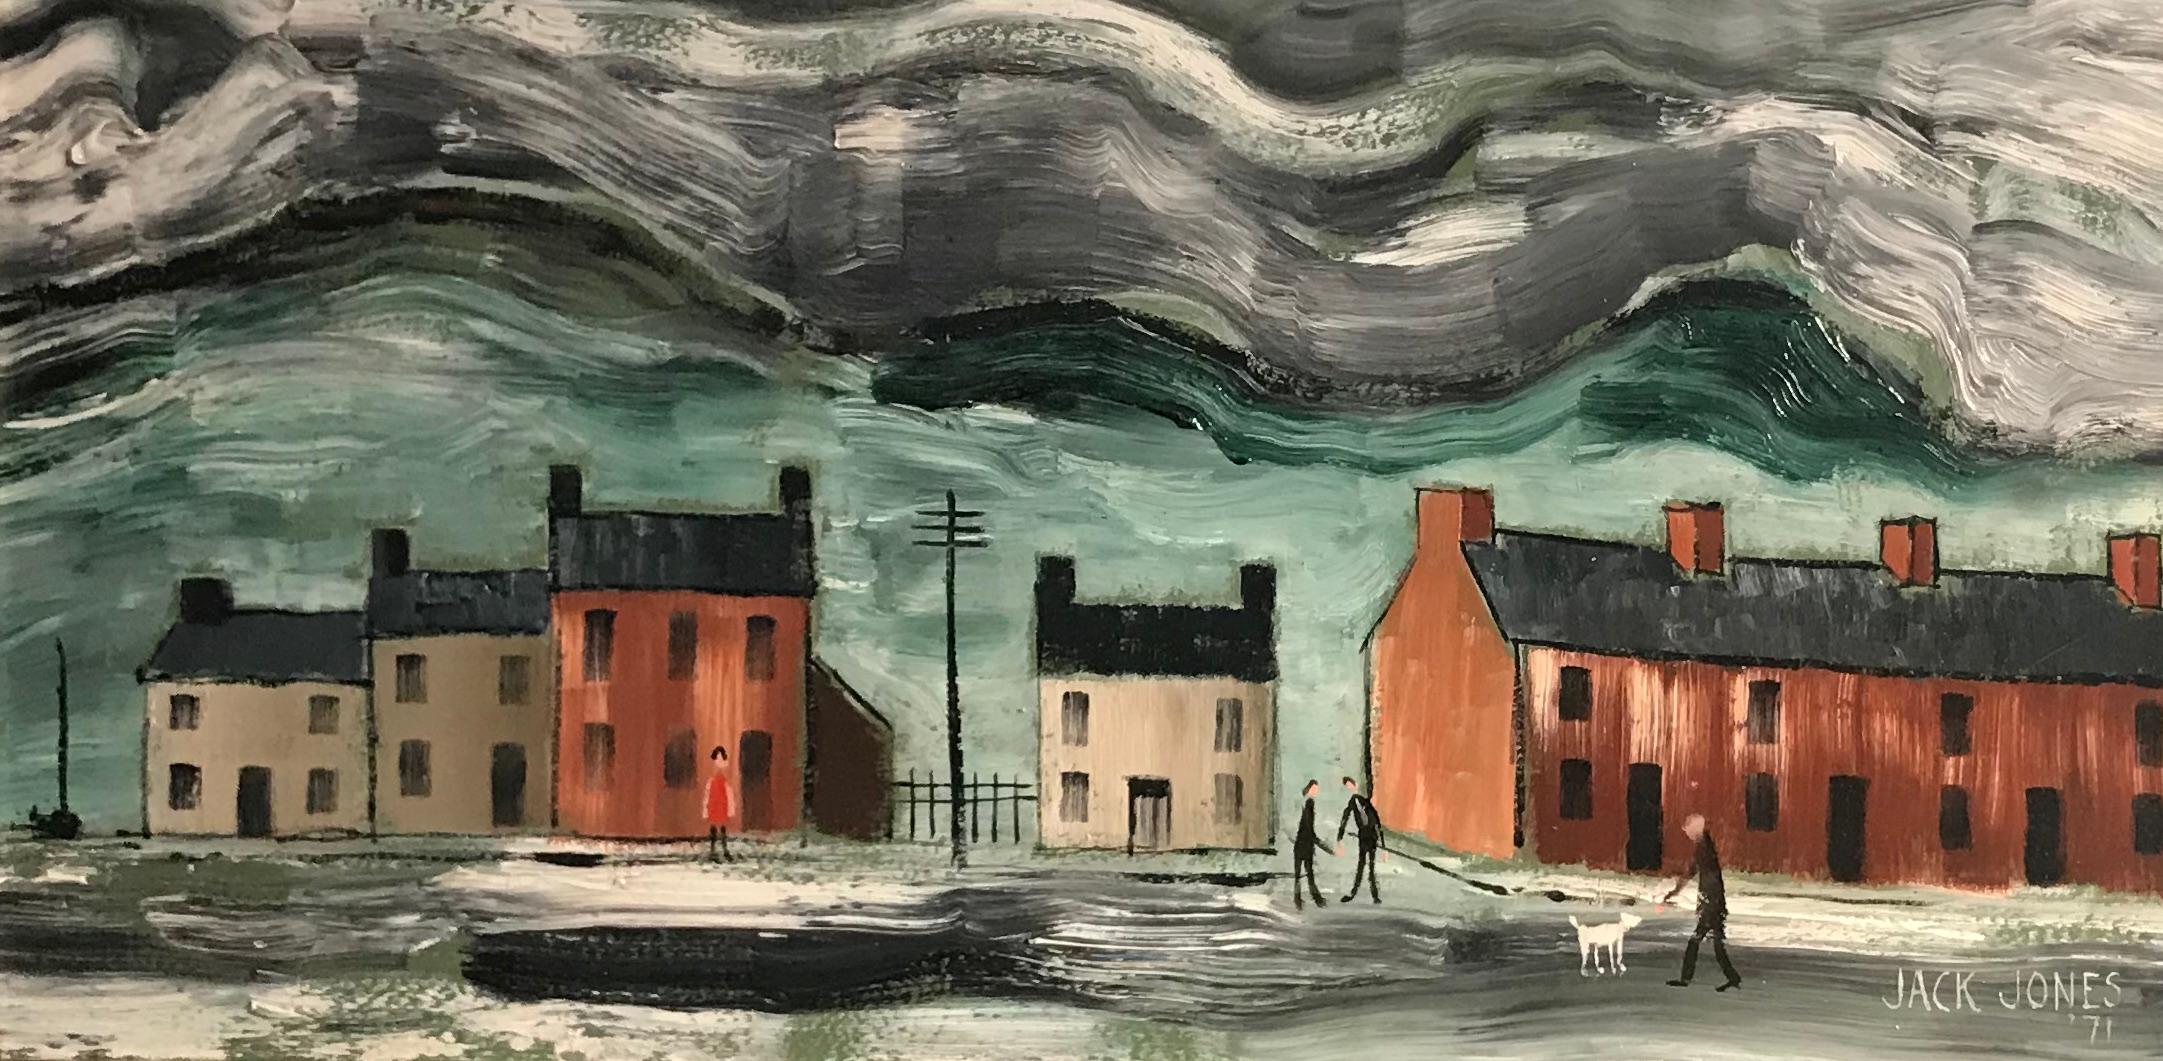 Jack Jones - Welsh Landscape 'Terrace, Man and Dog'. Houses, Moody sky and  Rich thick impasto For Sale at 1stDibs